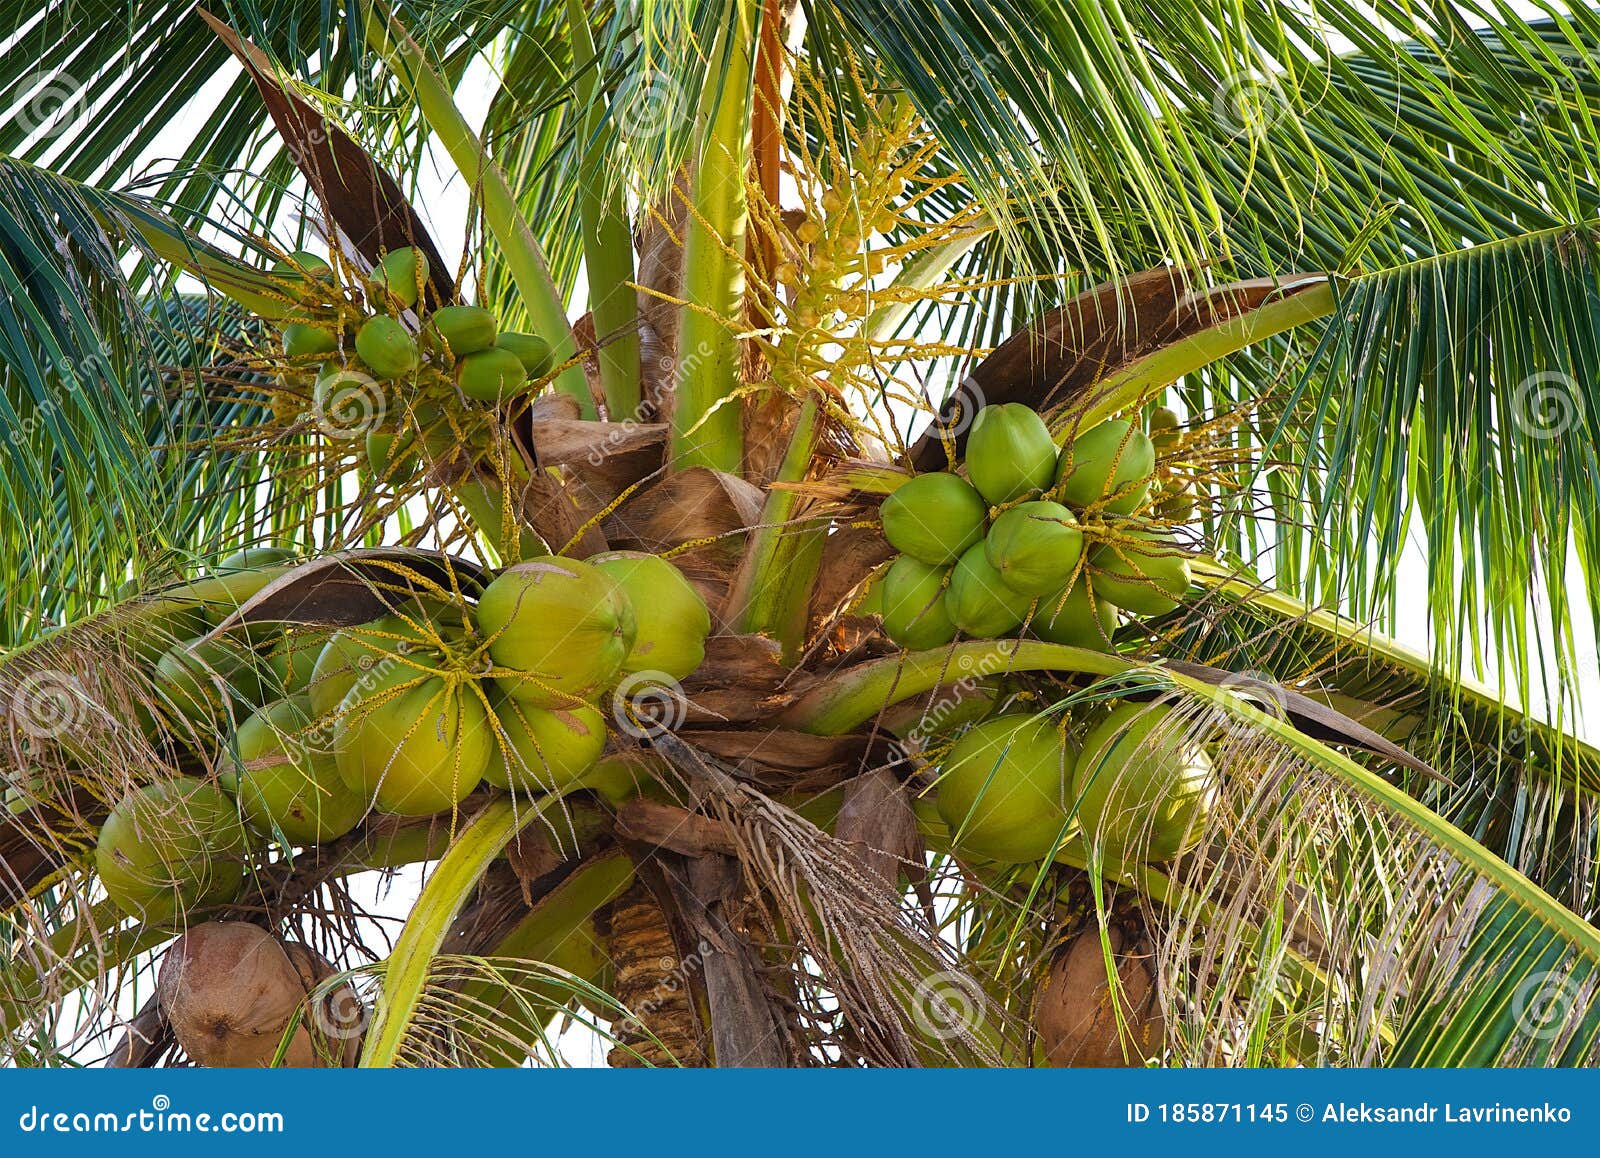 Coconut Harvesting on Tropical Samui Island in Thailand Stock Image ...